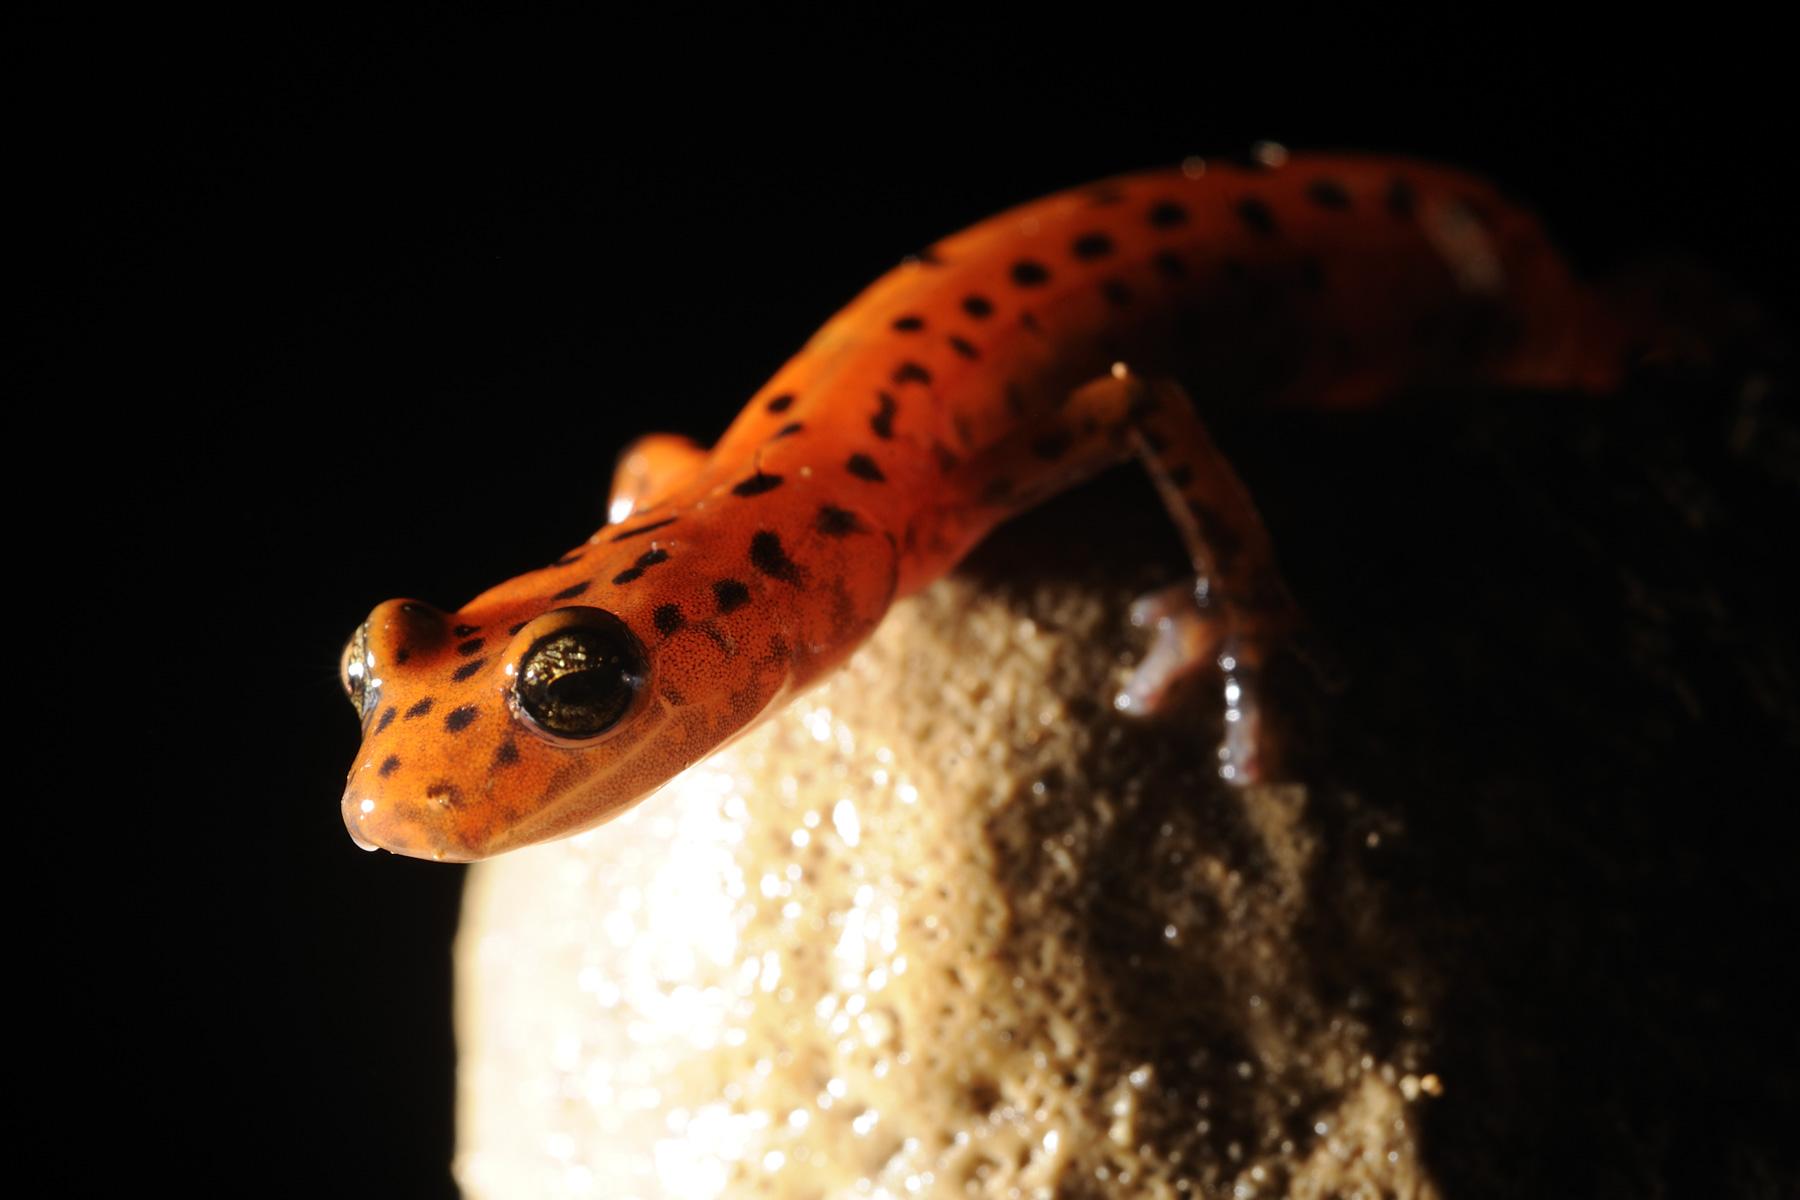 Blue Spring Cave (Tennessee). Salamandre.